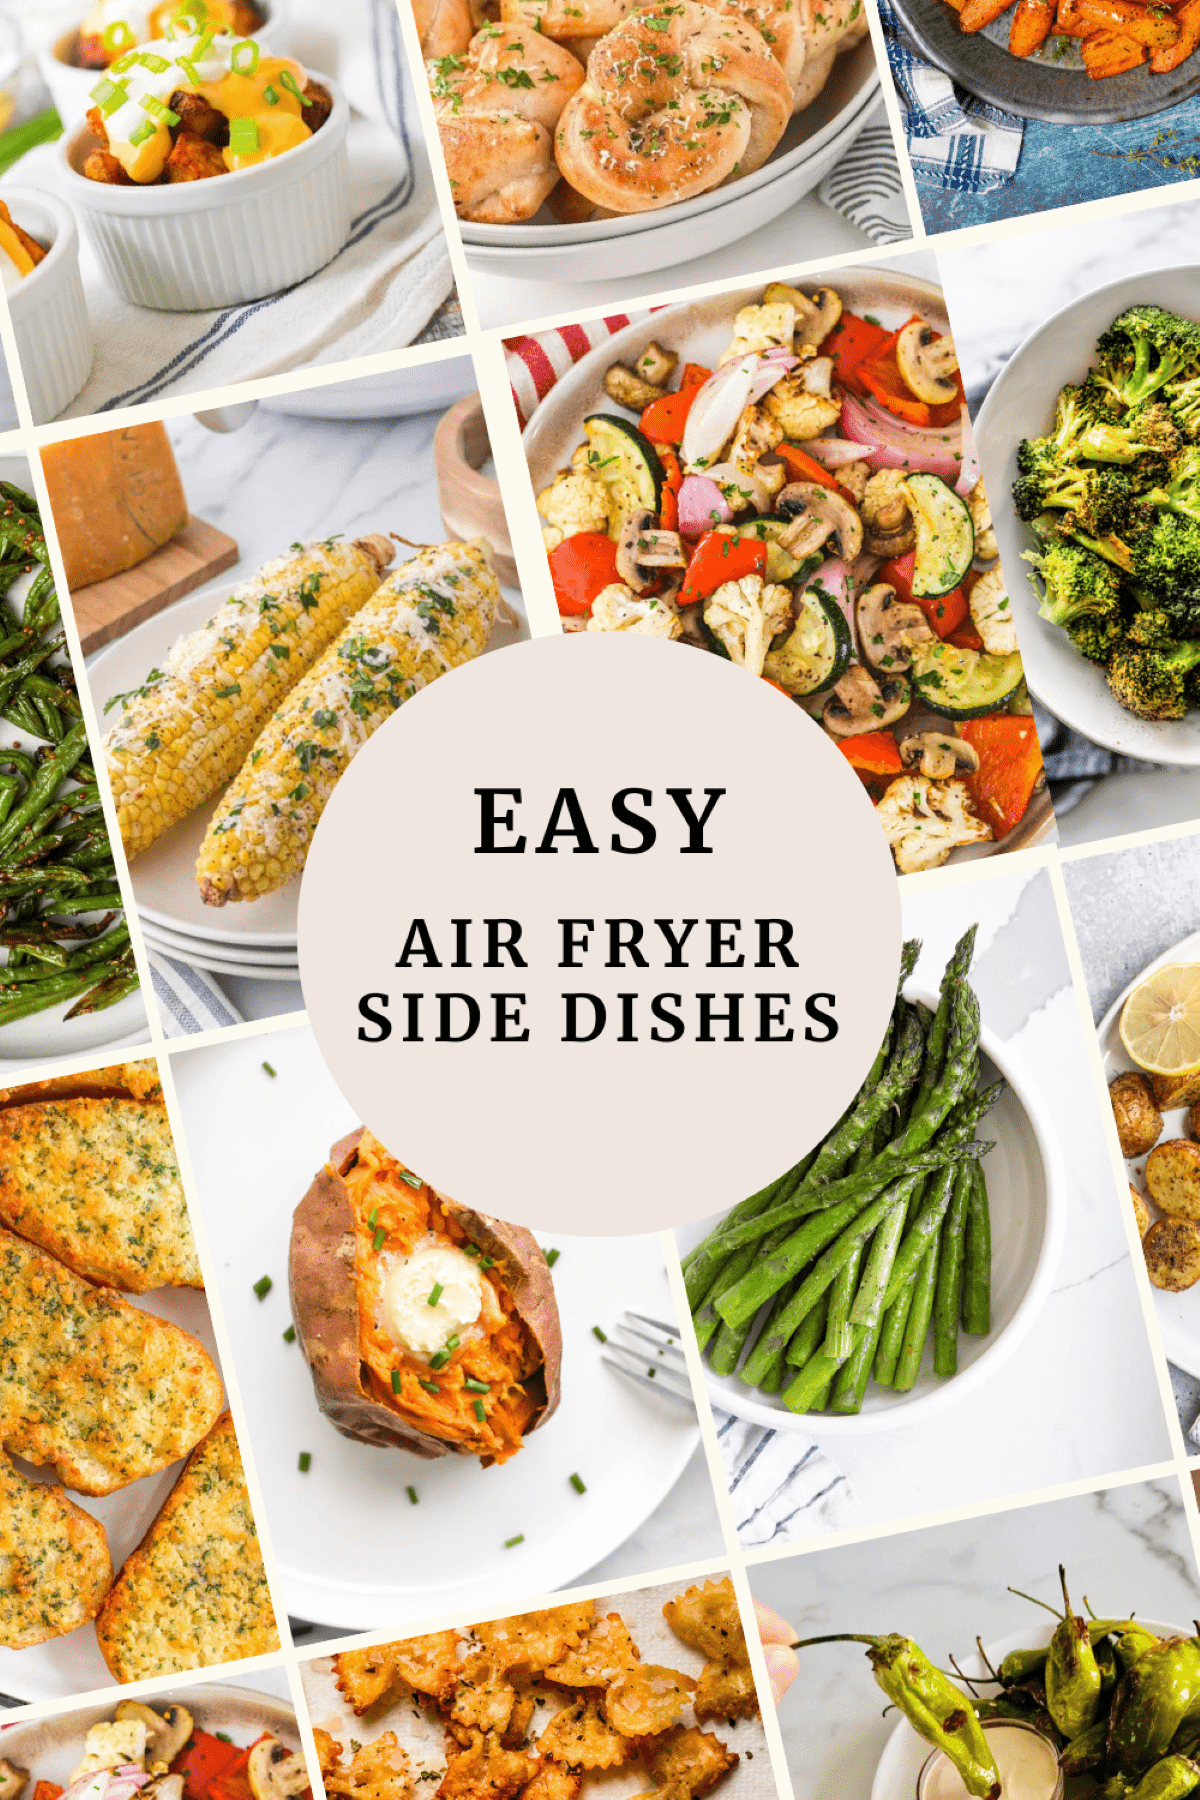 A collage of images of air fryer side dish recipes.